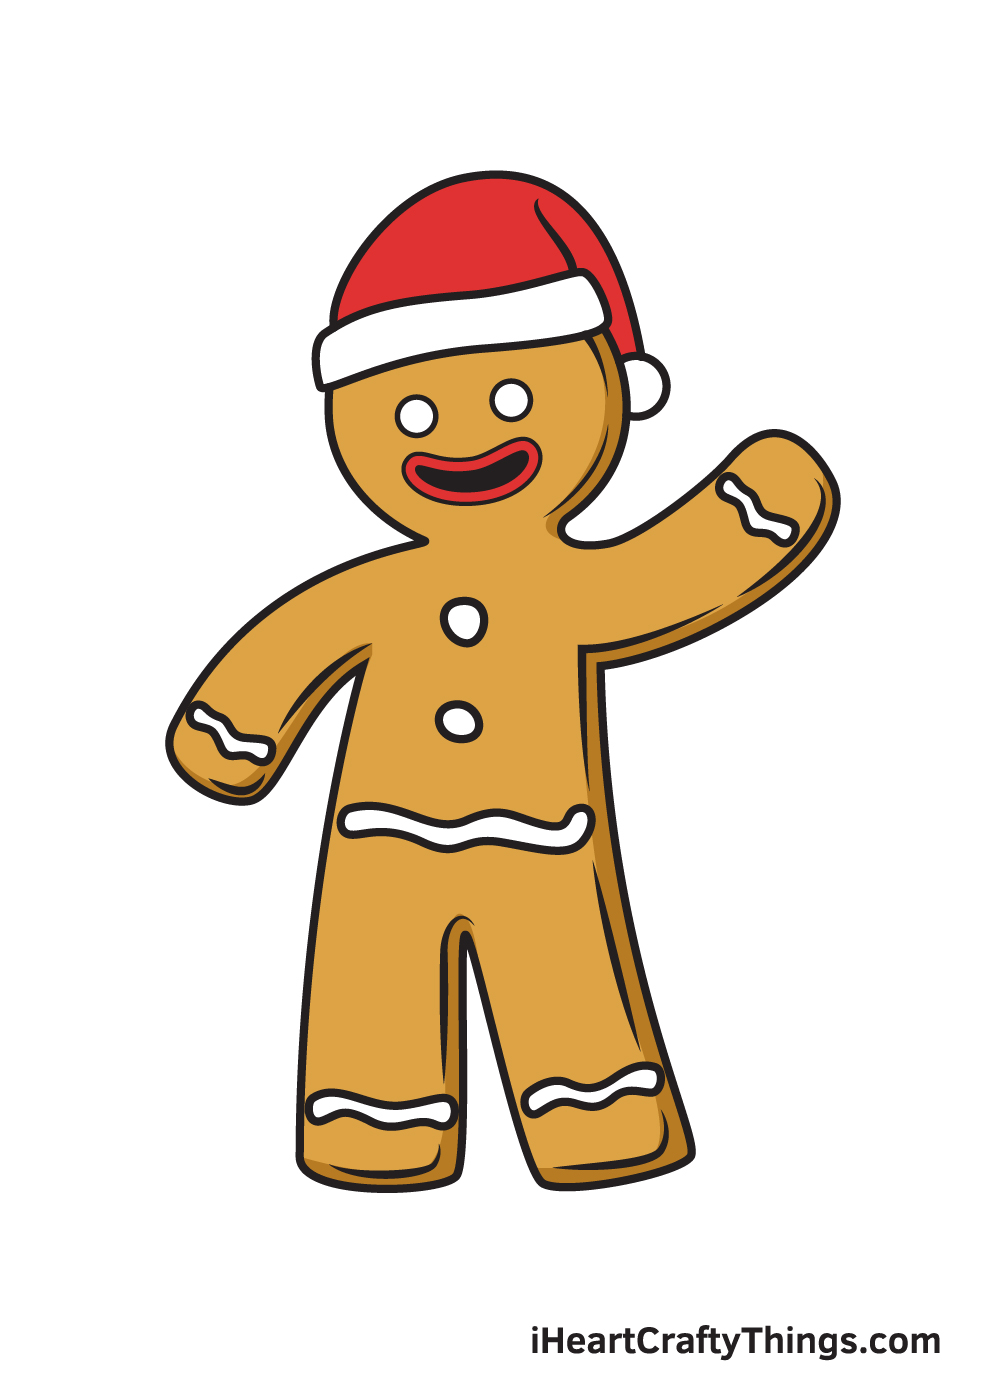 Gingerbread Man Drawing - How To Draw A Gingerbread Man Step By Step